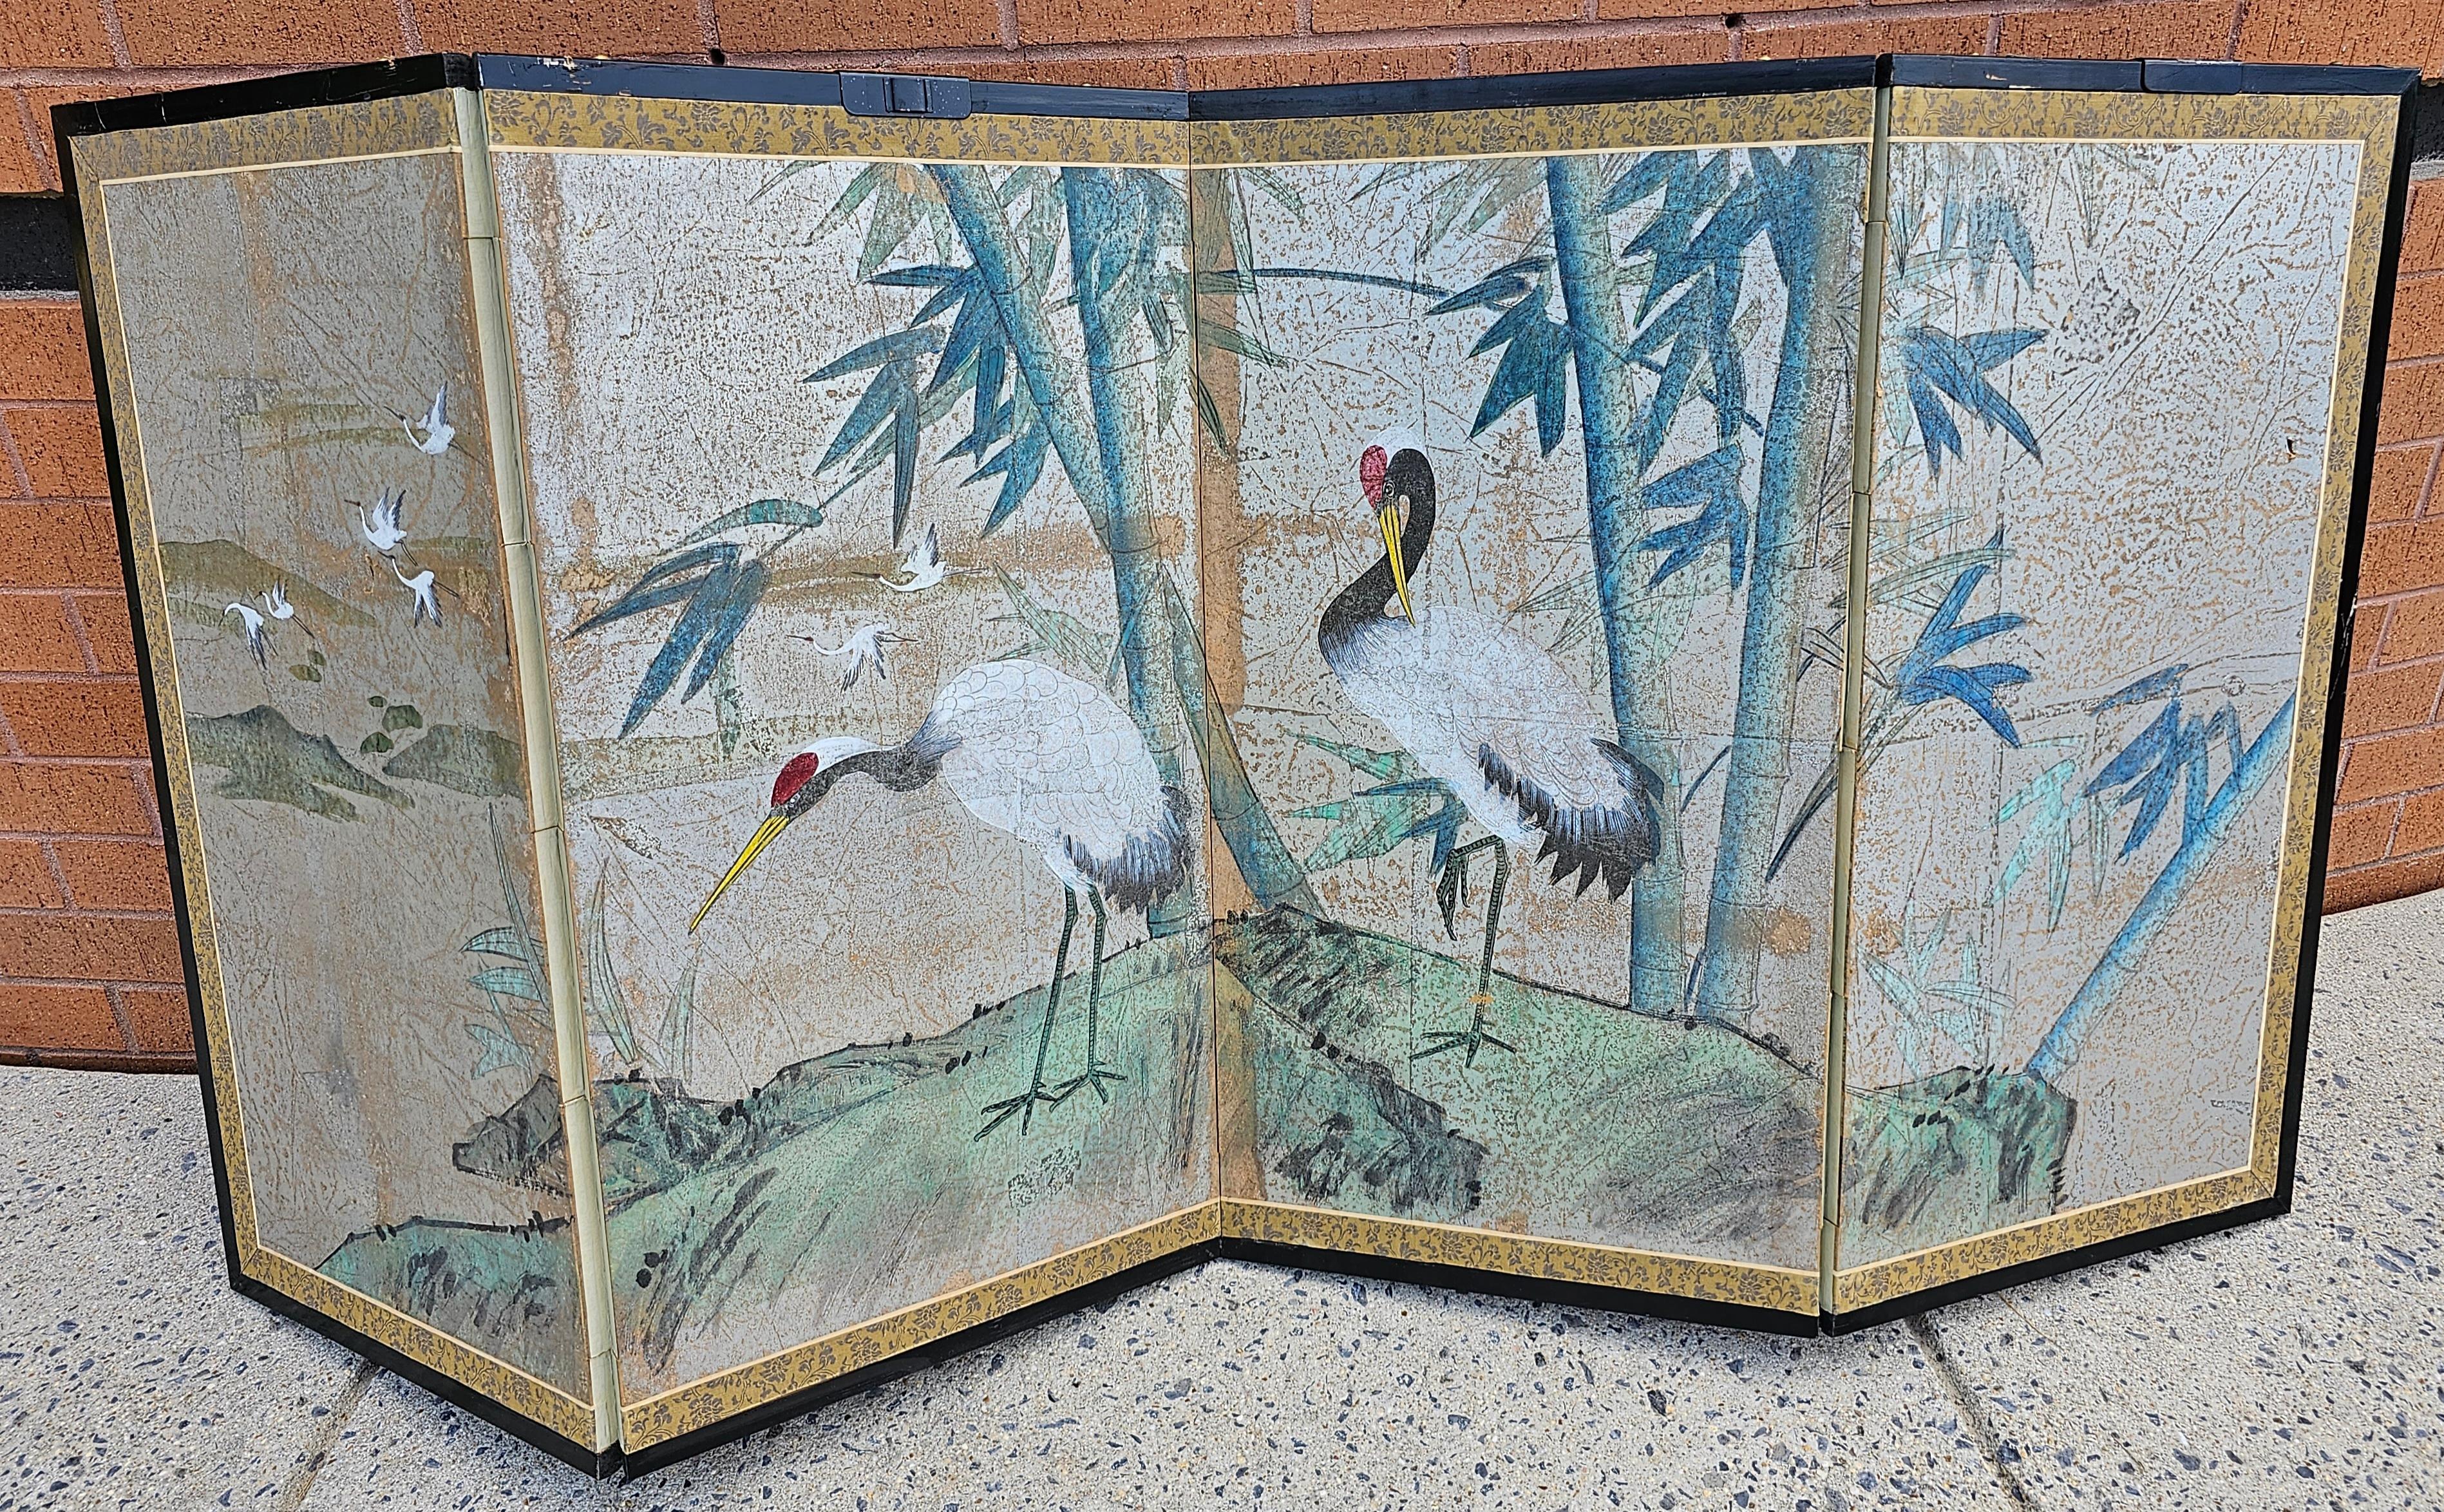 A 71 inches East Asian Wide Folding  Low Four Panel Landscape Divider Screen with beautiful landscape scenes. 
Measures 71